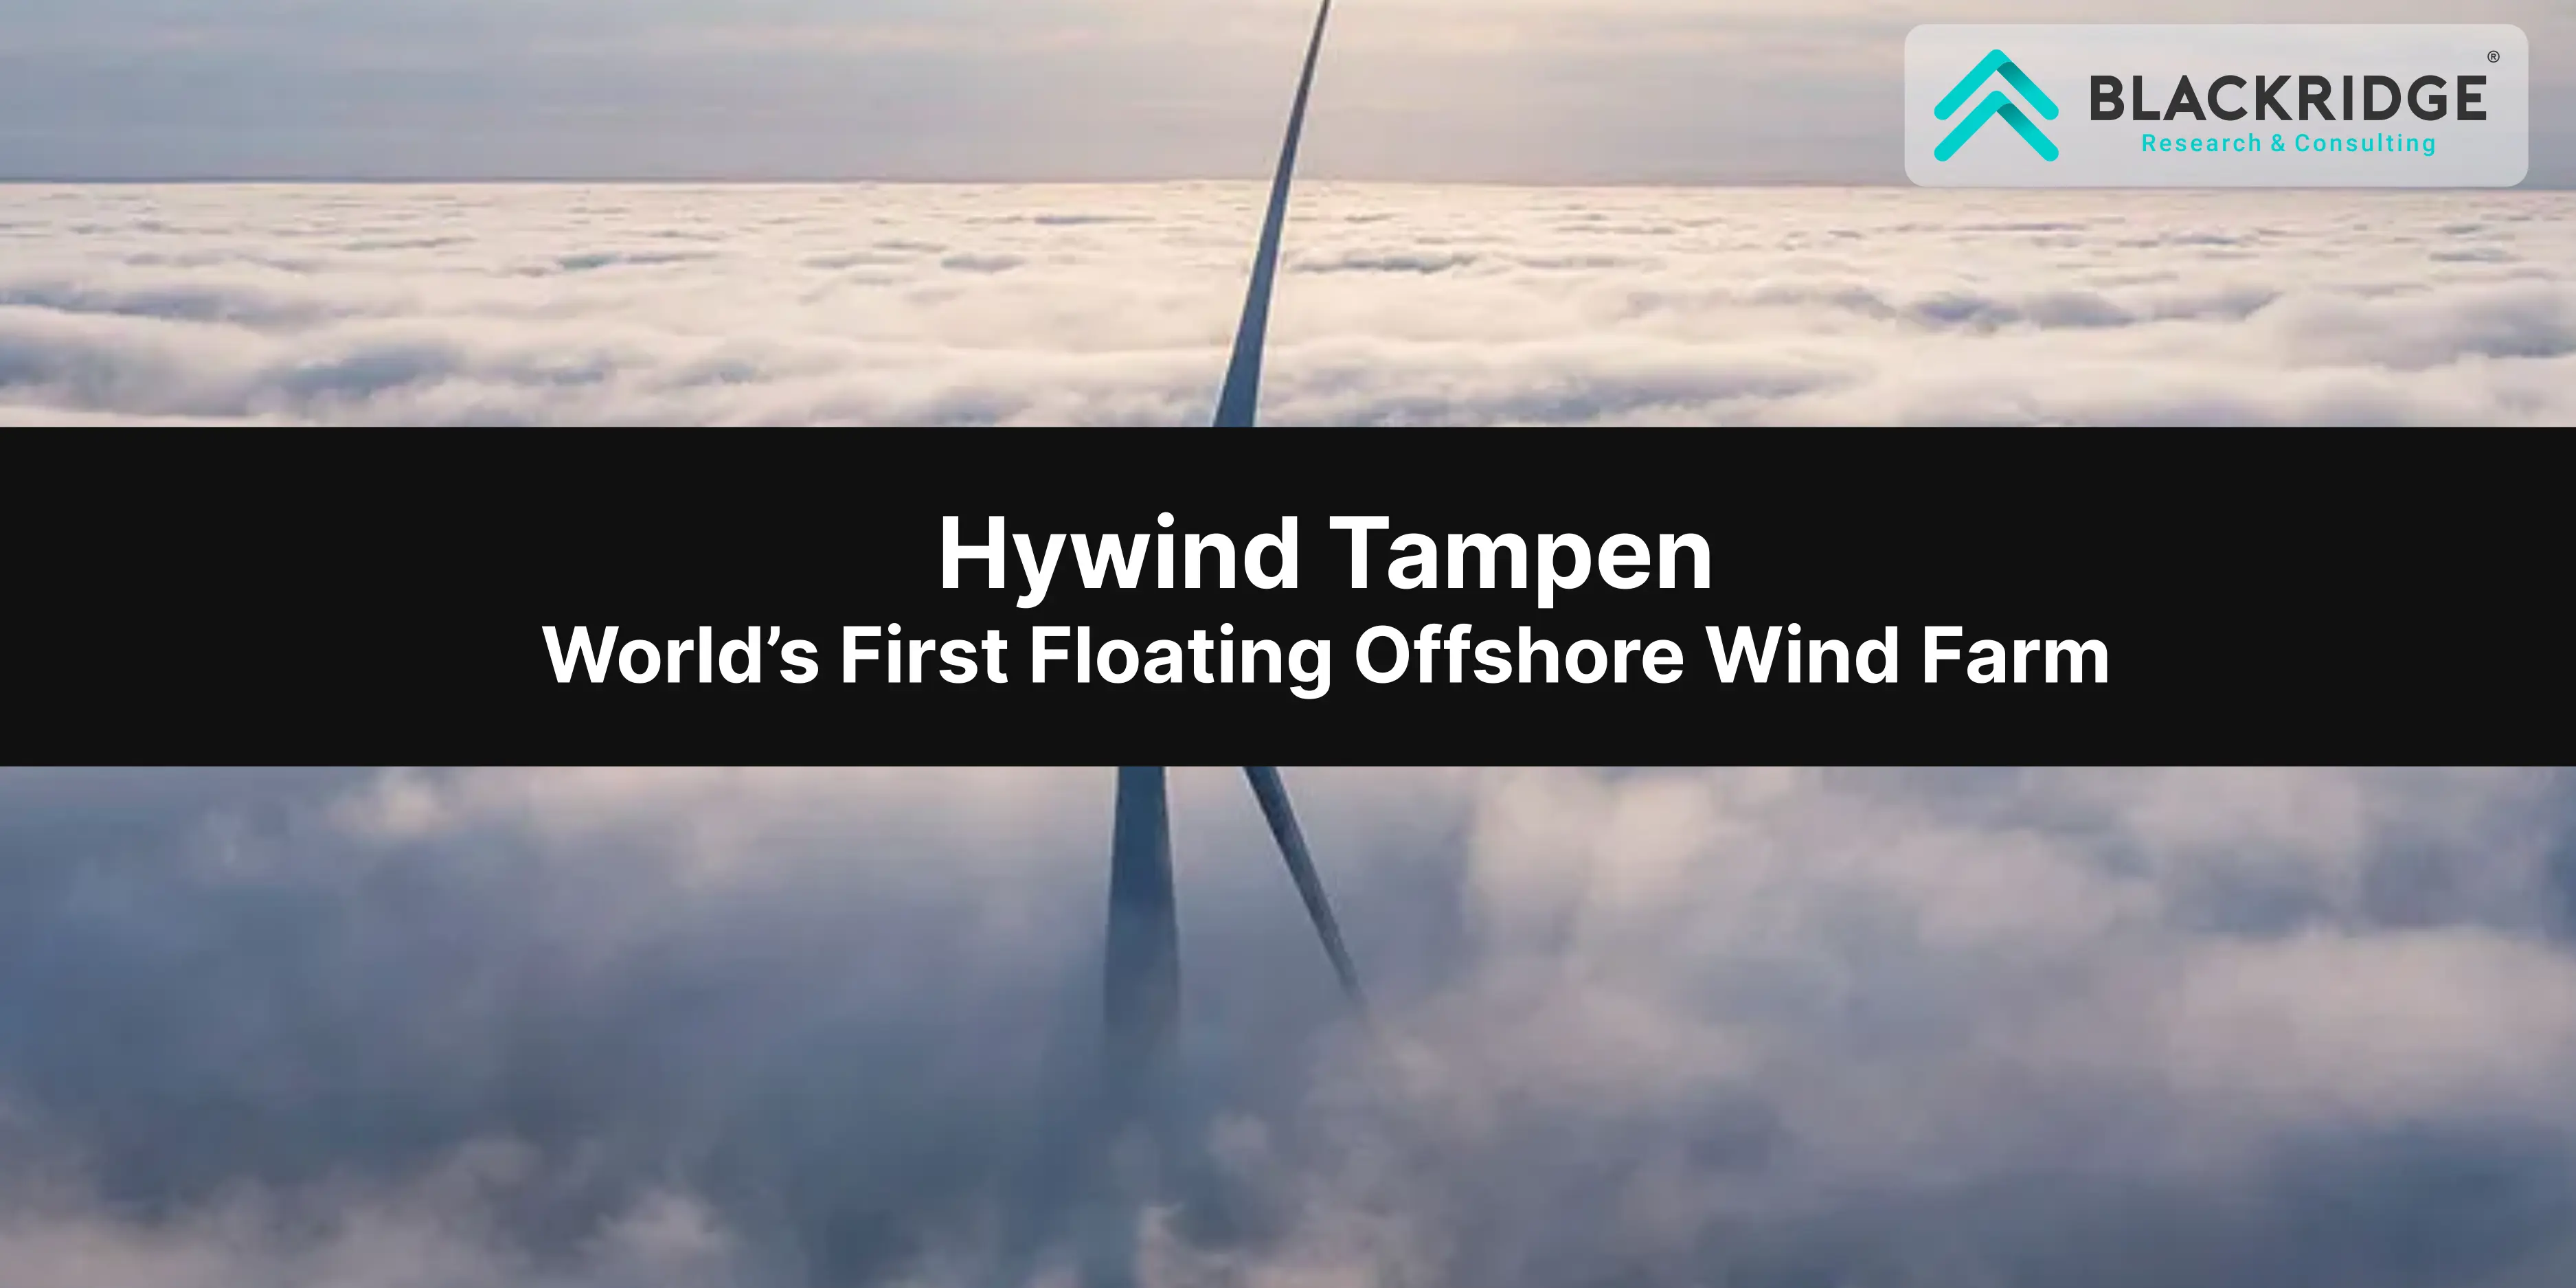 Hywind Tampen: World’s First Floating Offshore Wind Farm for Oil and Gas Operations in North Sea